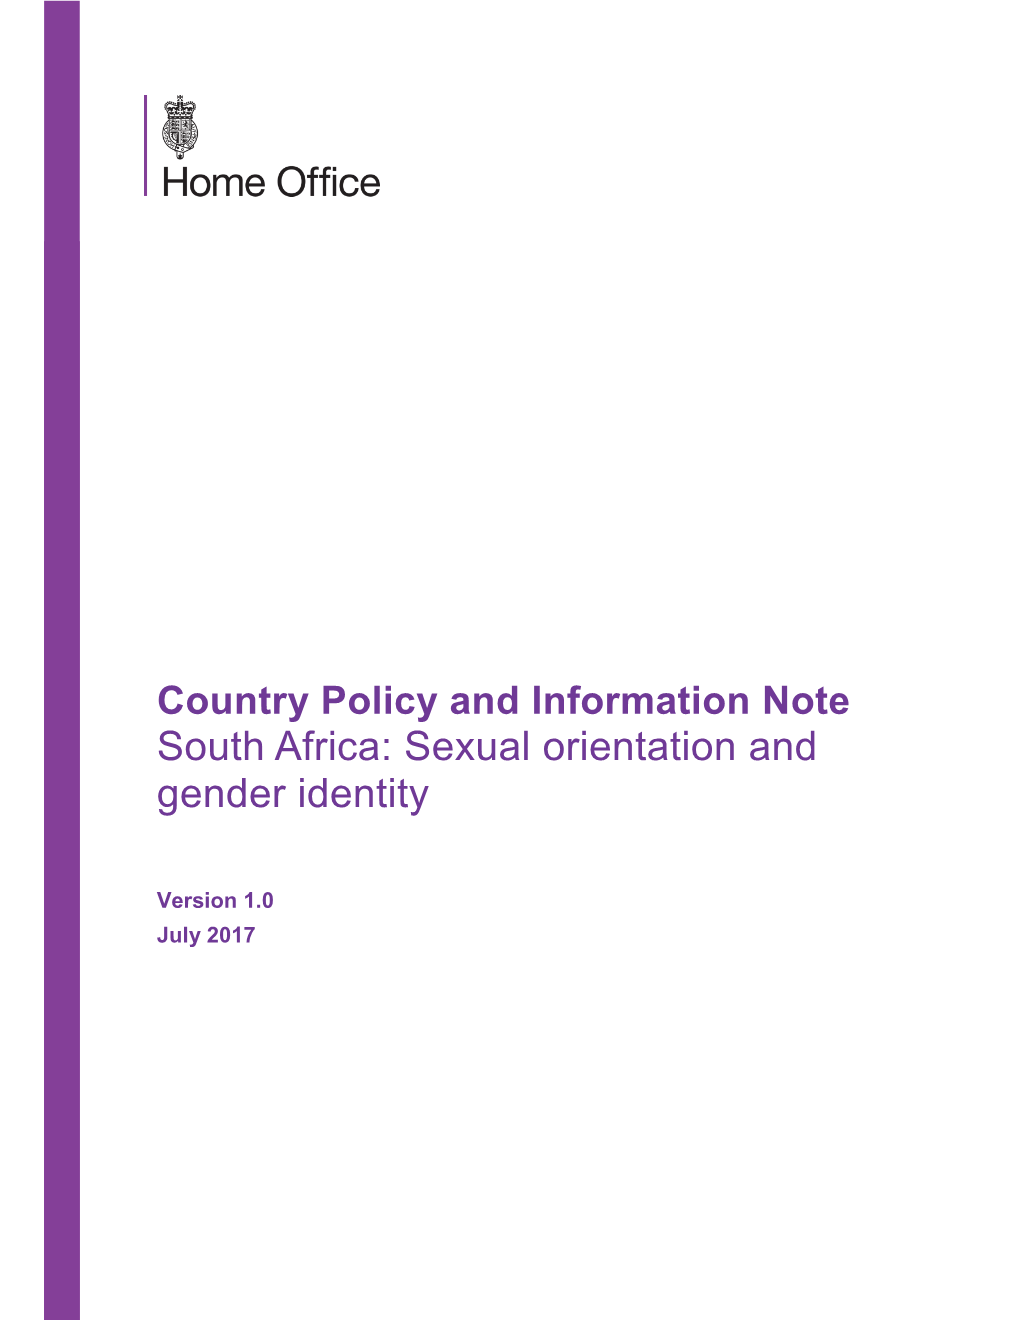 South Africa: Sexual Orientation and Gender Identity